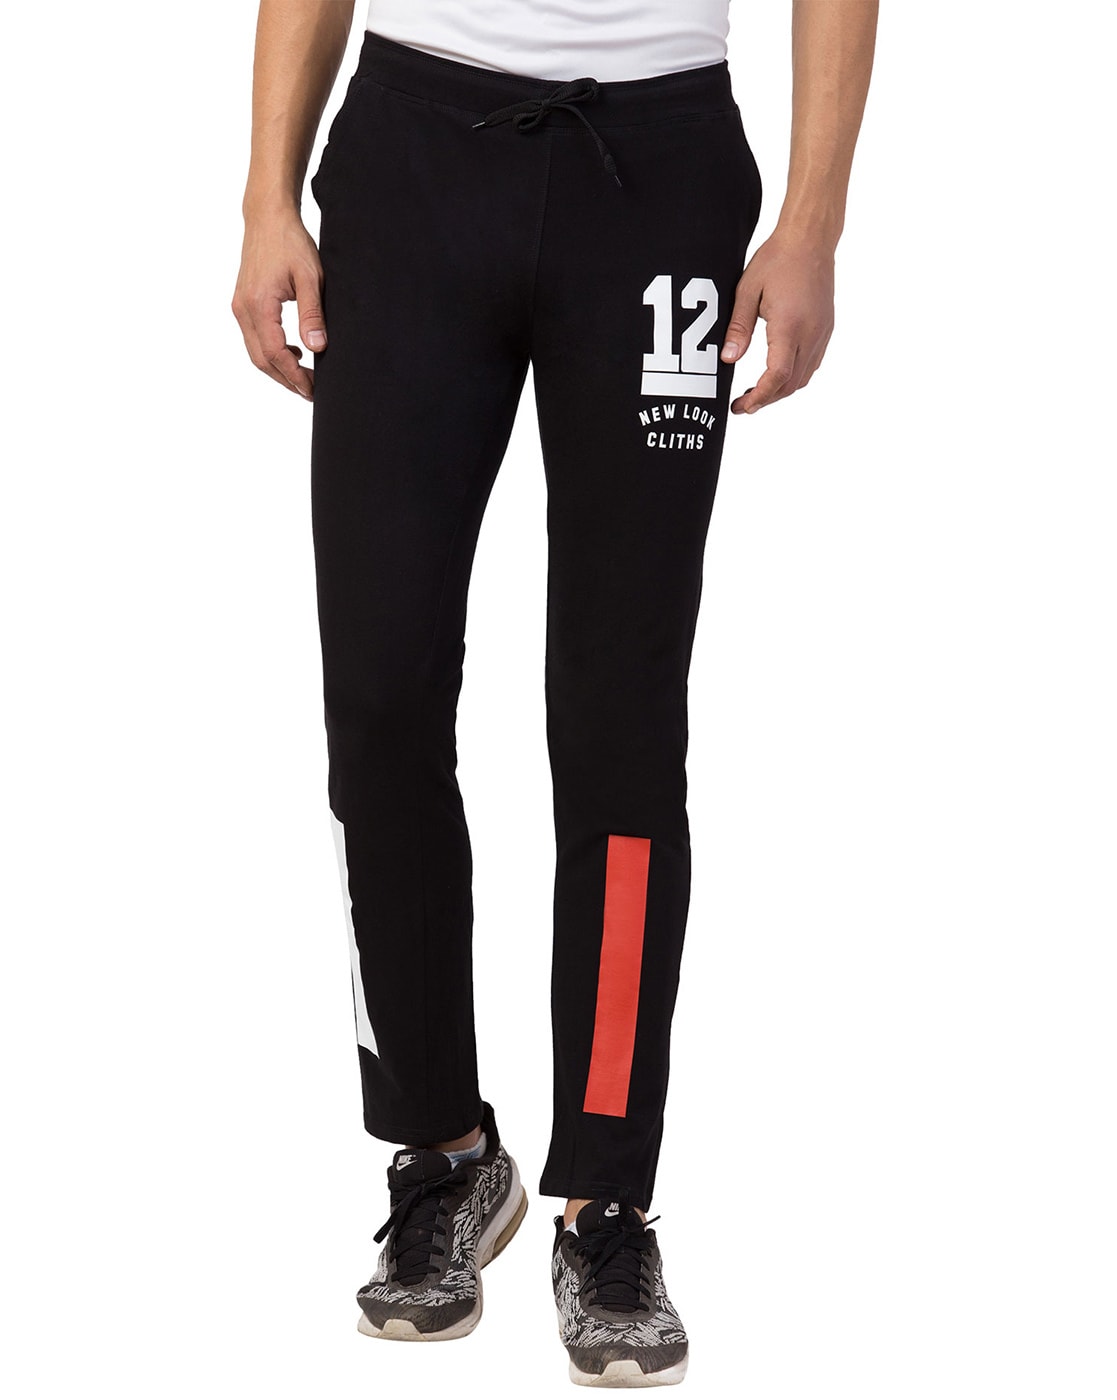 Buy Black Track Pants for Men by CLITHS Online | Ajio.com